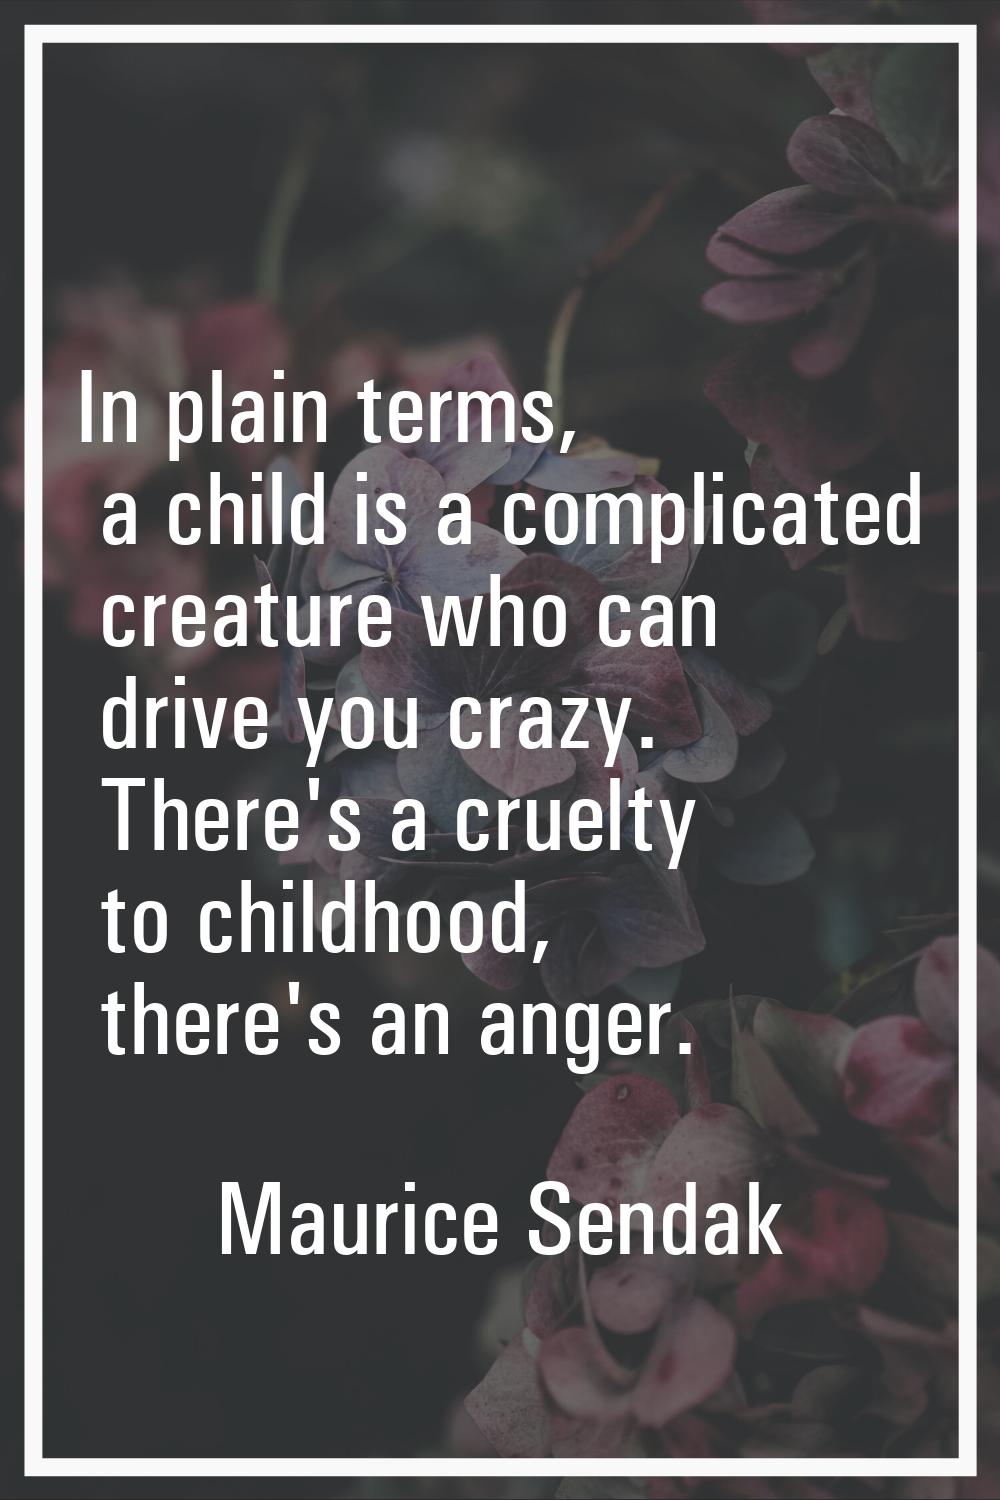 In plain terms, a child is a complicated creature who can drive you crazy. There's a cruelty to chi